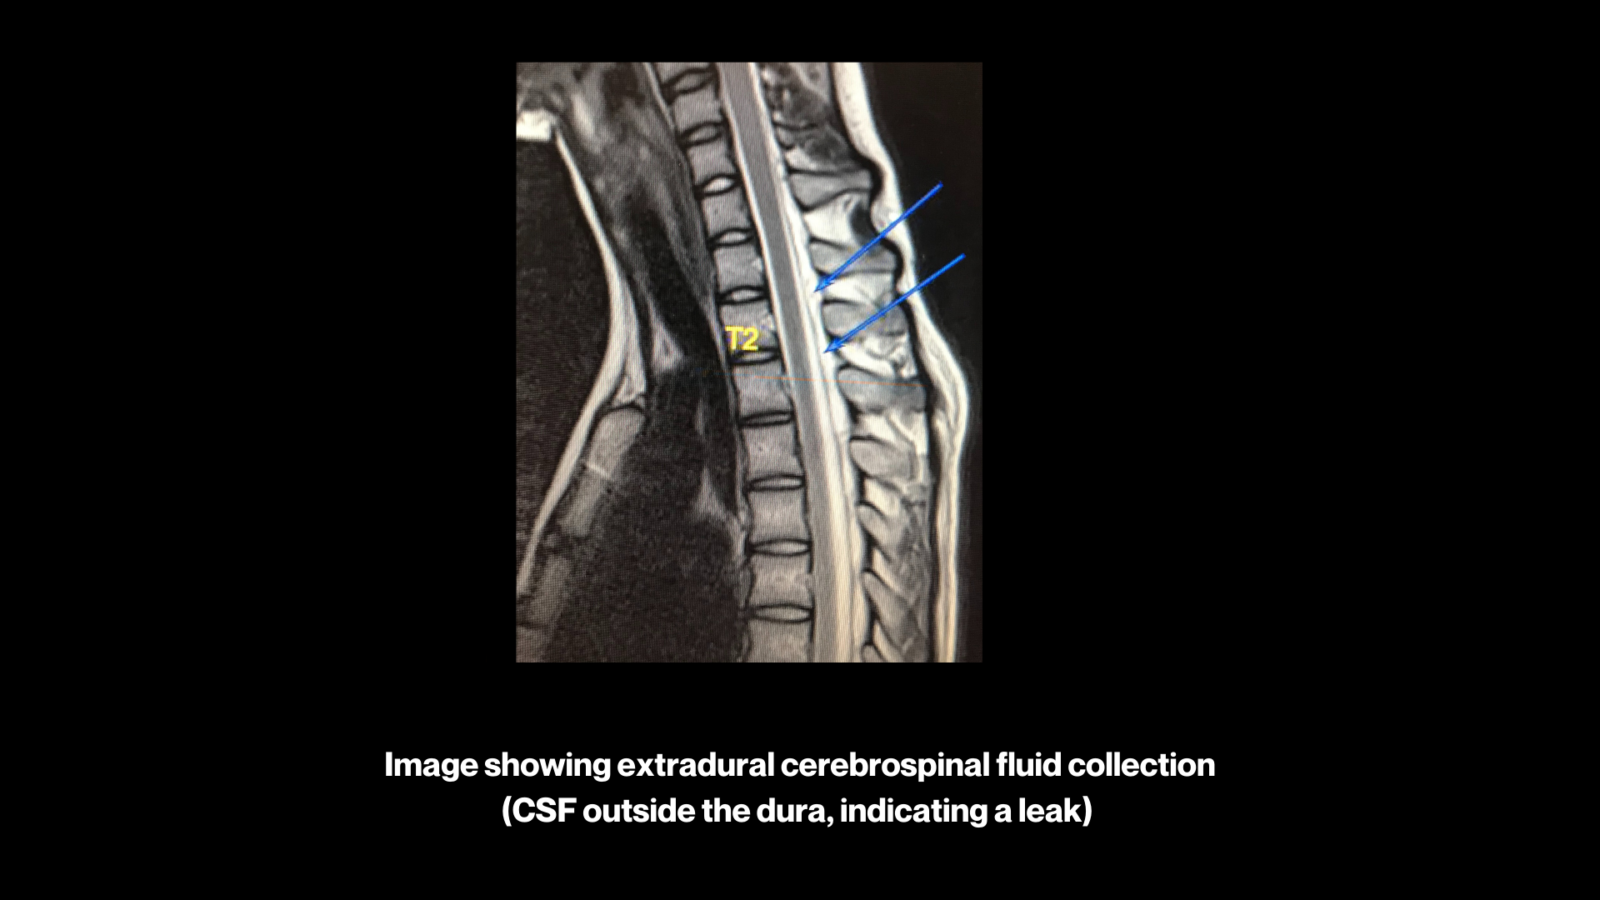 Jack's story: a medical image showing extradural CSF collection
